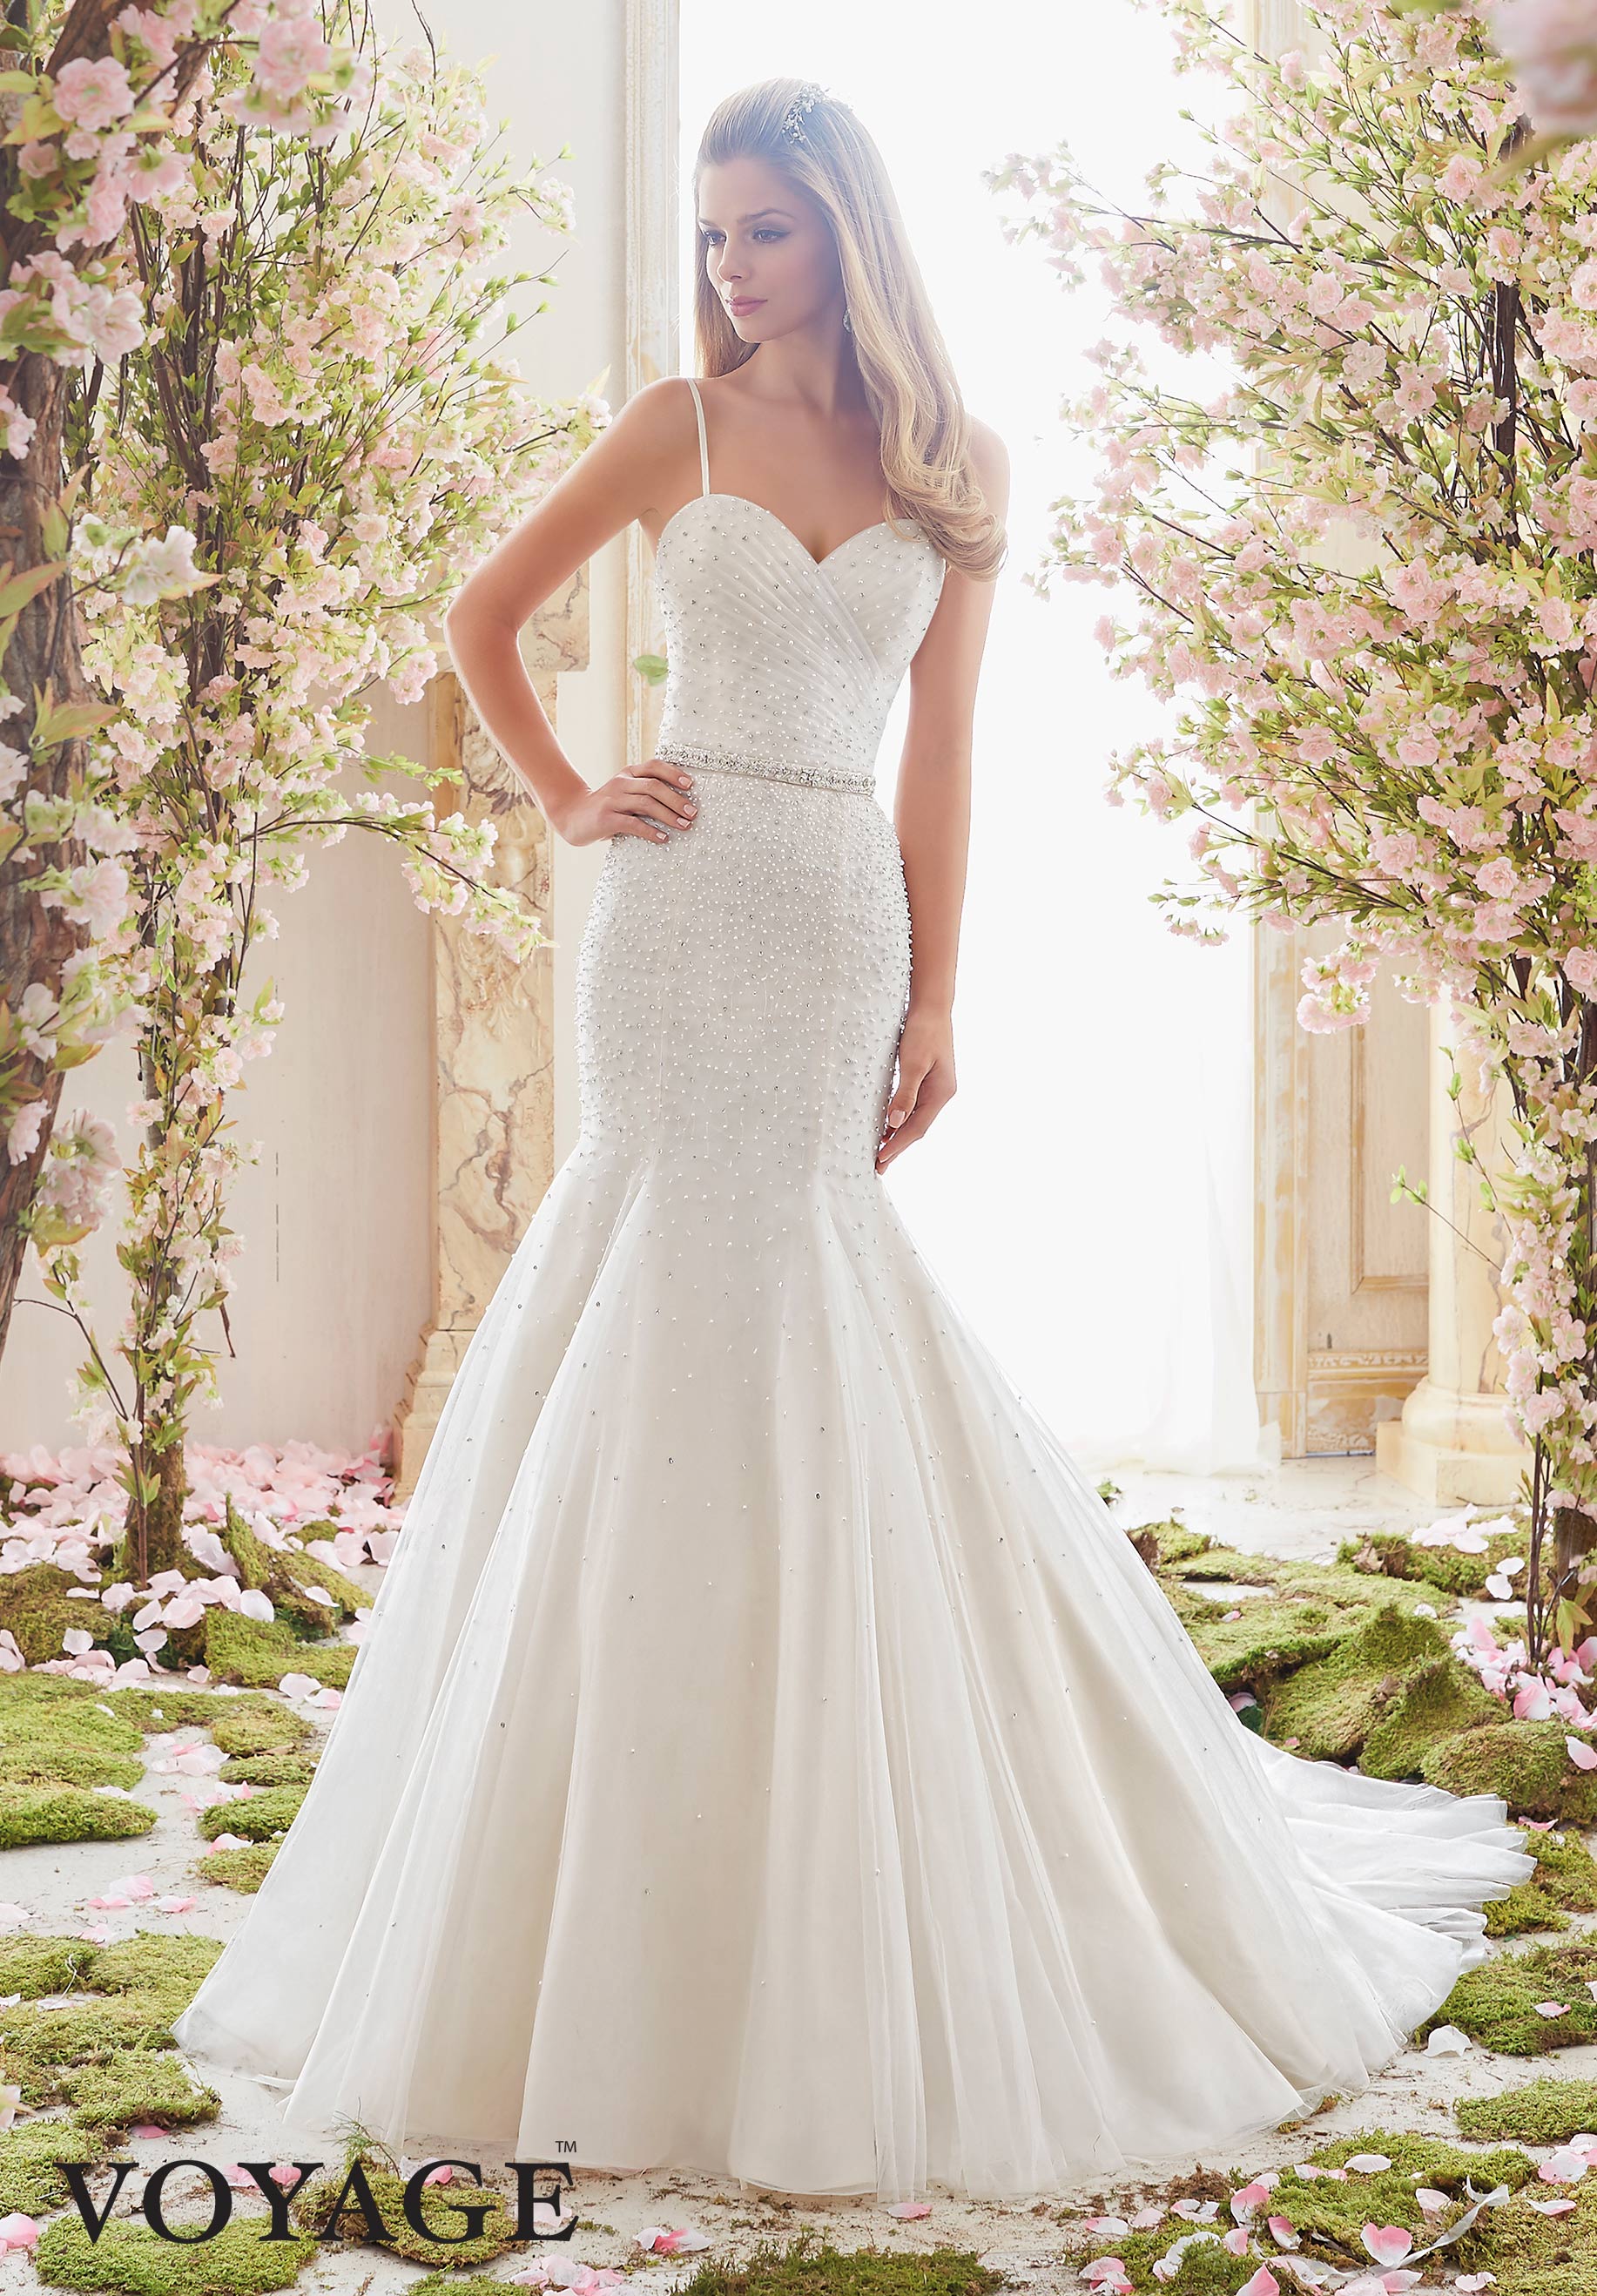 Dress Mori Lee Voyage Fall 2016 Collection 6835 Pearl And Crystal